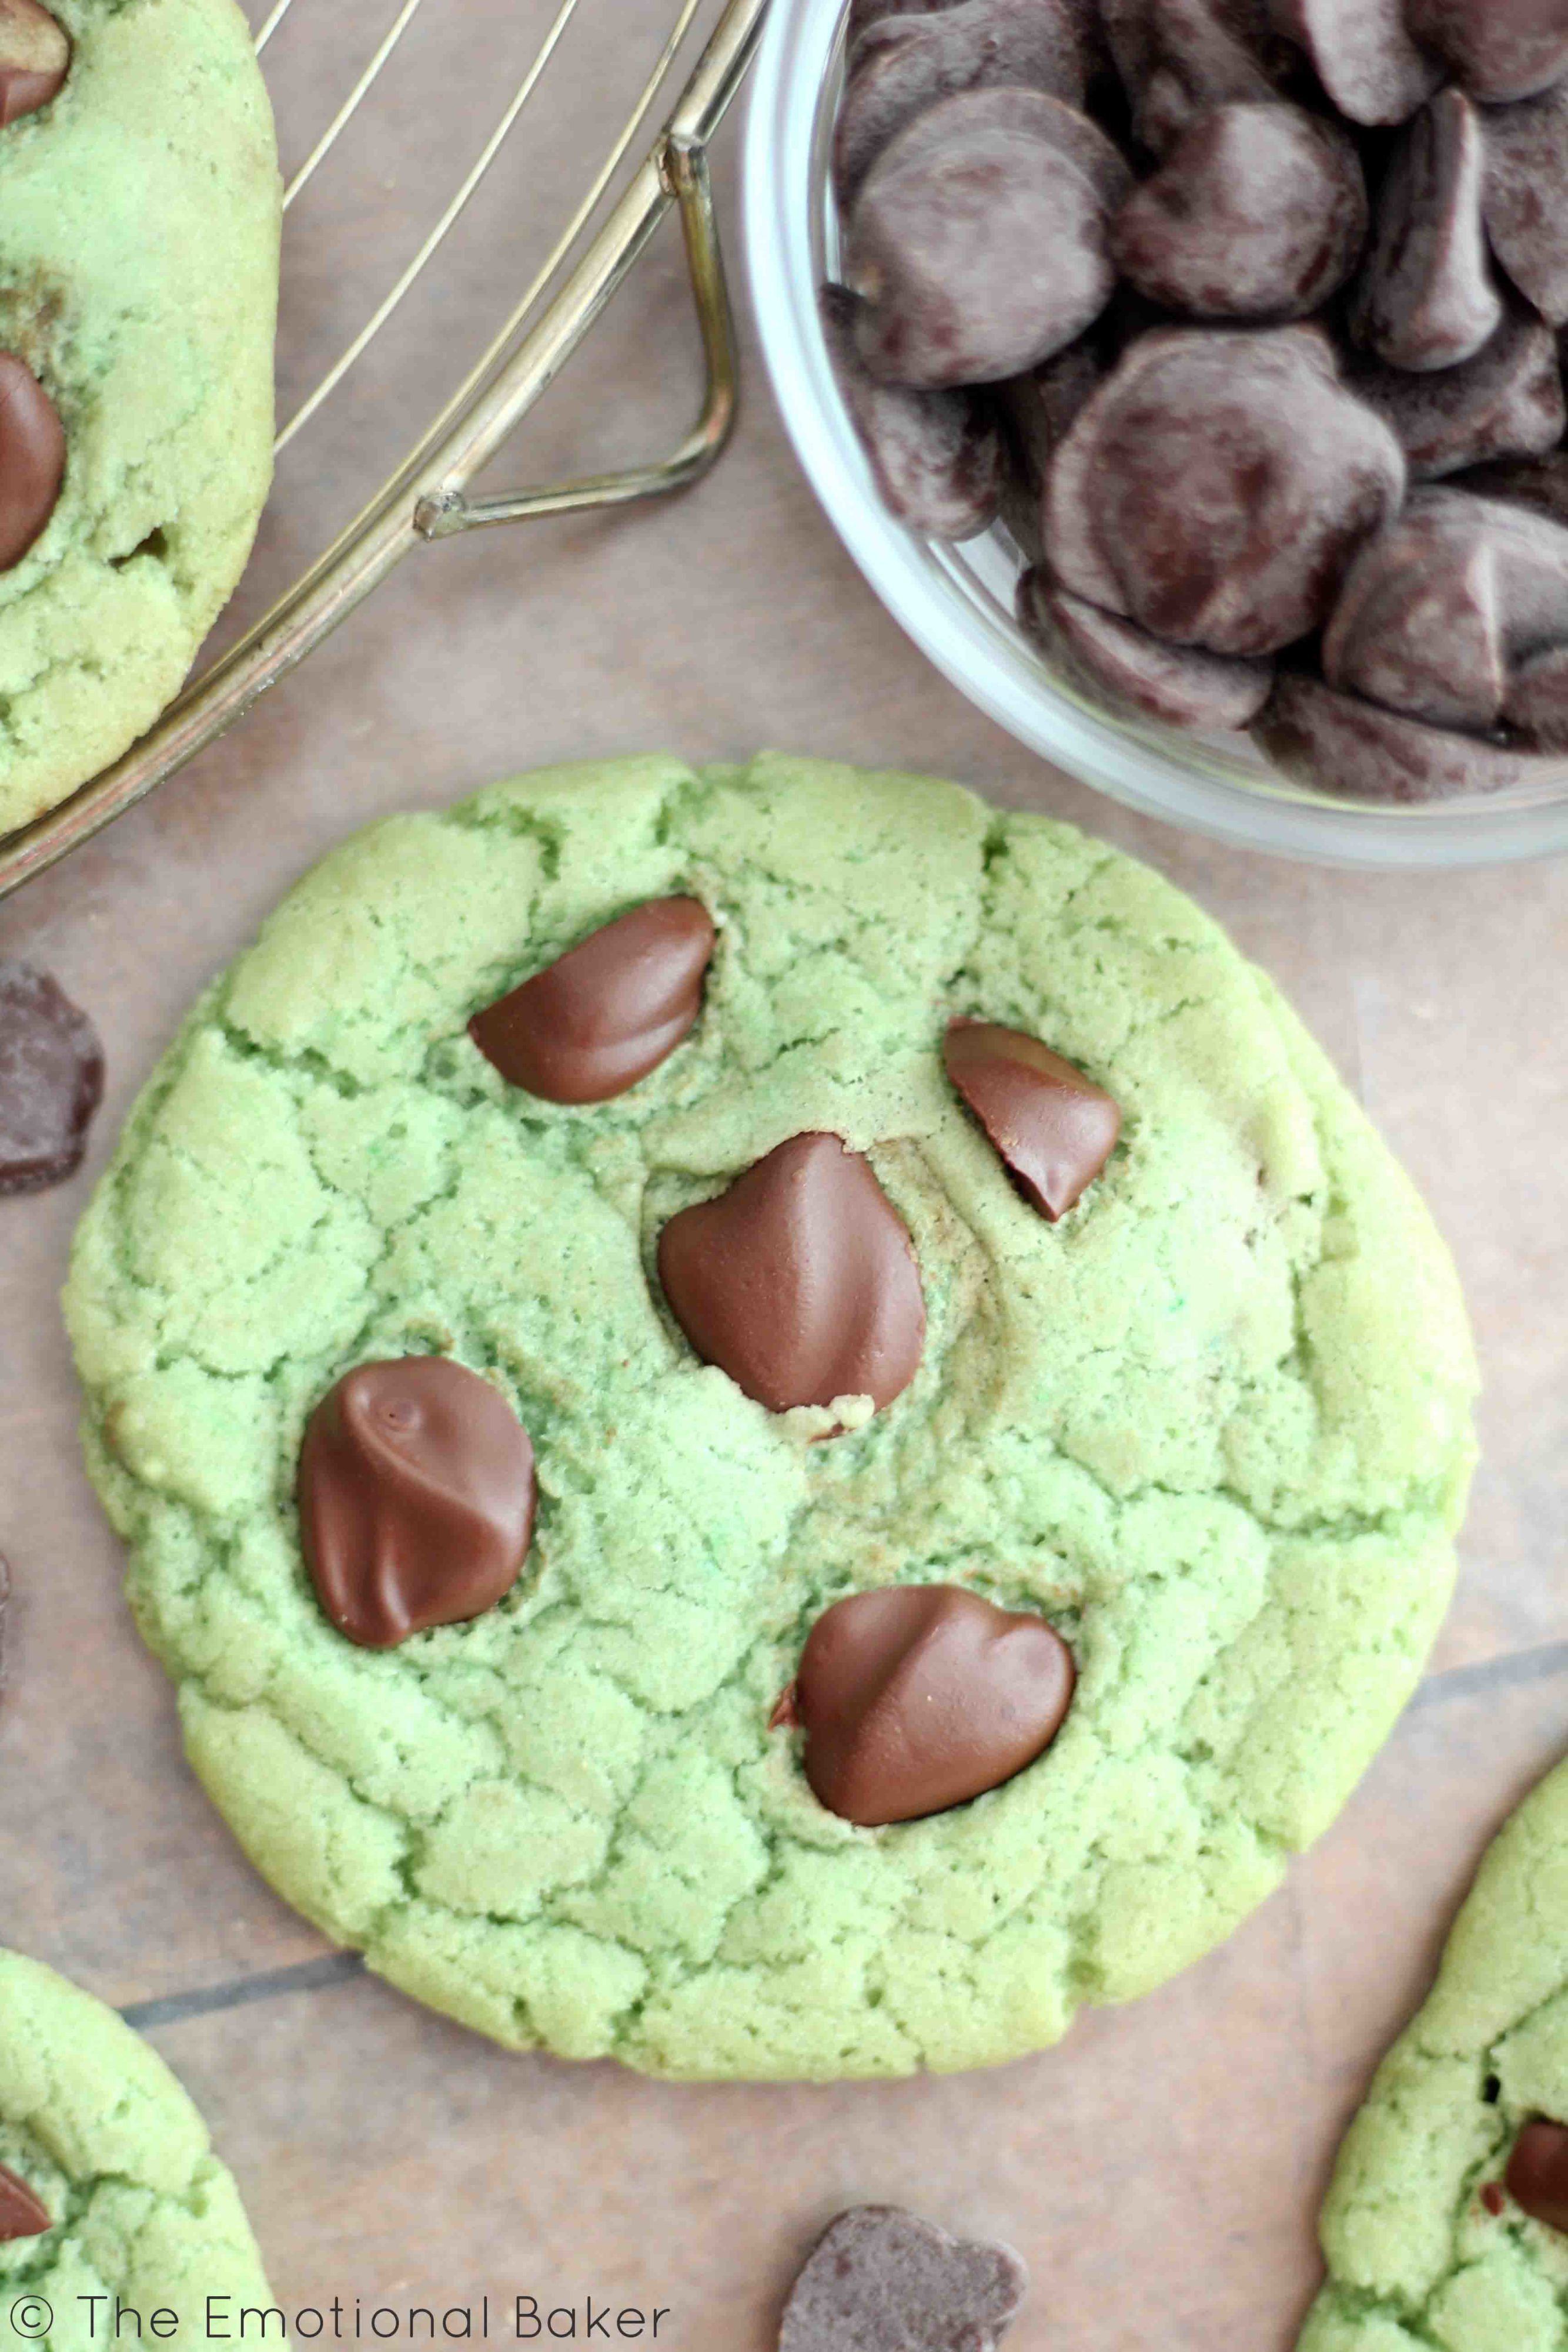 These vegan mint chocolate chip cookies are sure to be your new favorite!